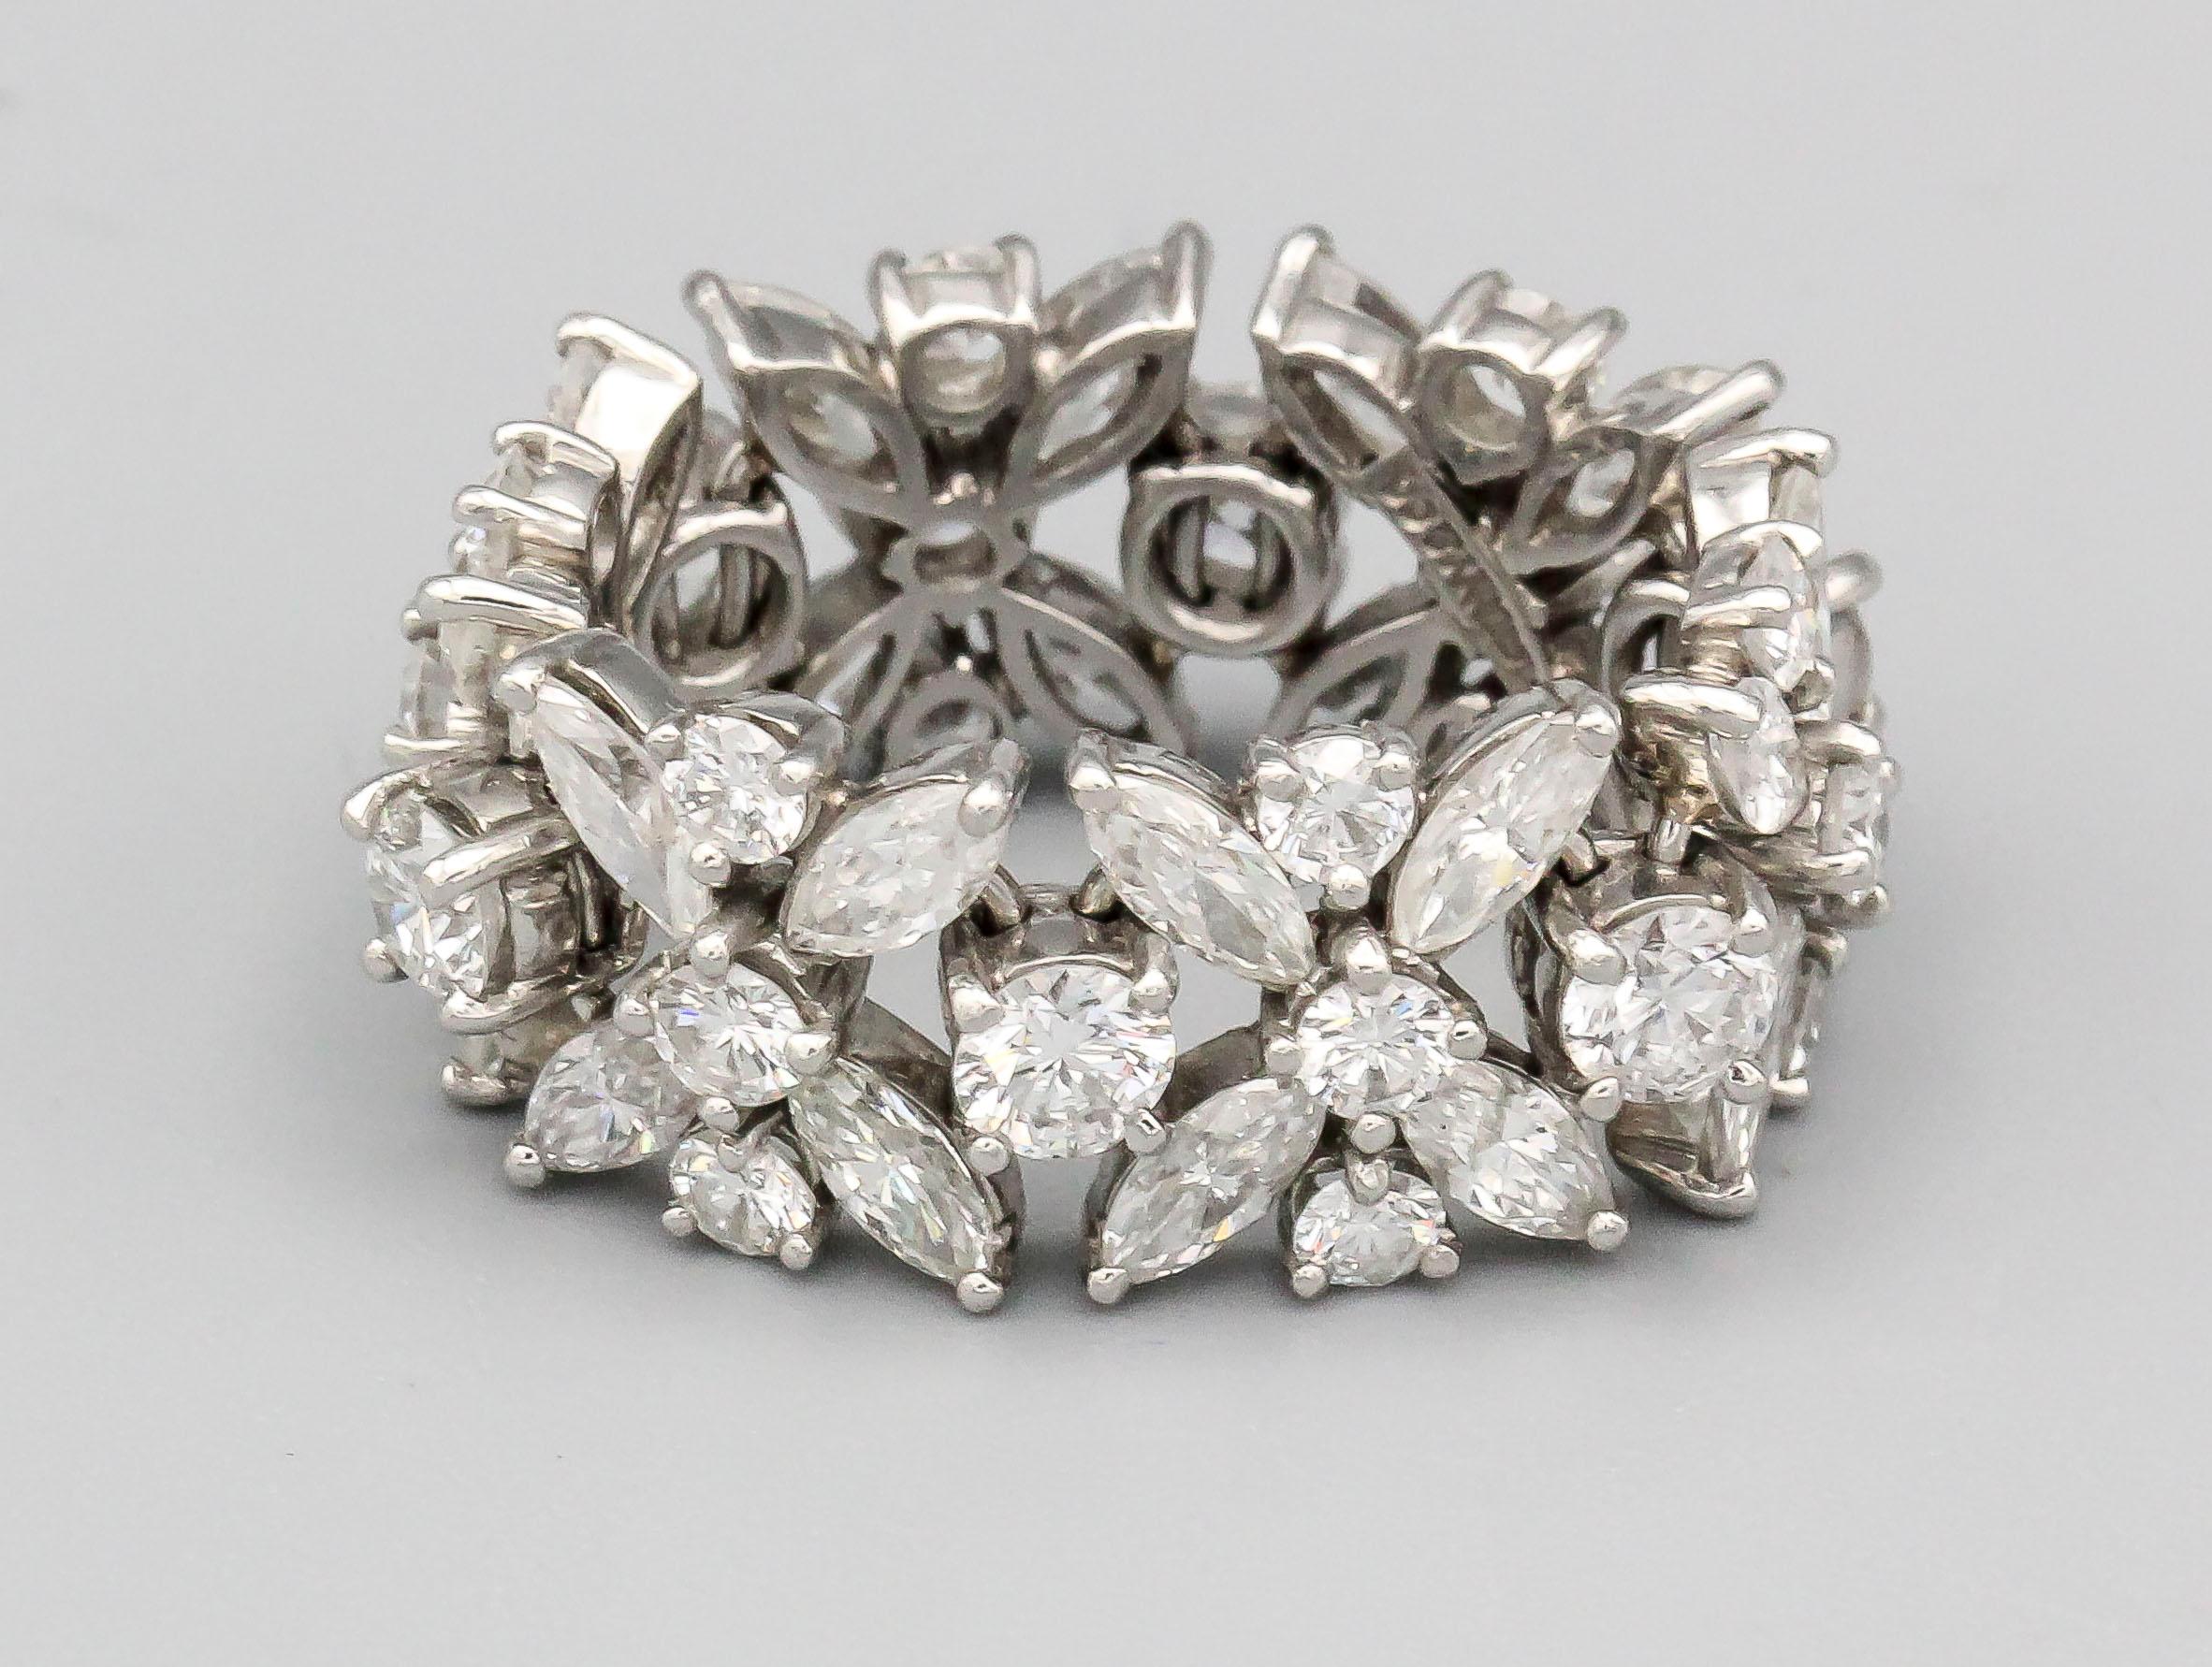 Fine platinum and diamond band by Tiffany & Co., circa 1970s. It features high grade round brilliant cut diamonds and marquise cut diamonds, approx. 5.0 carats of G-H color and VS clarity, set in a beautifully intricate flexible design. Size